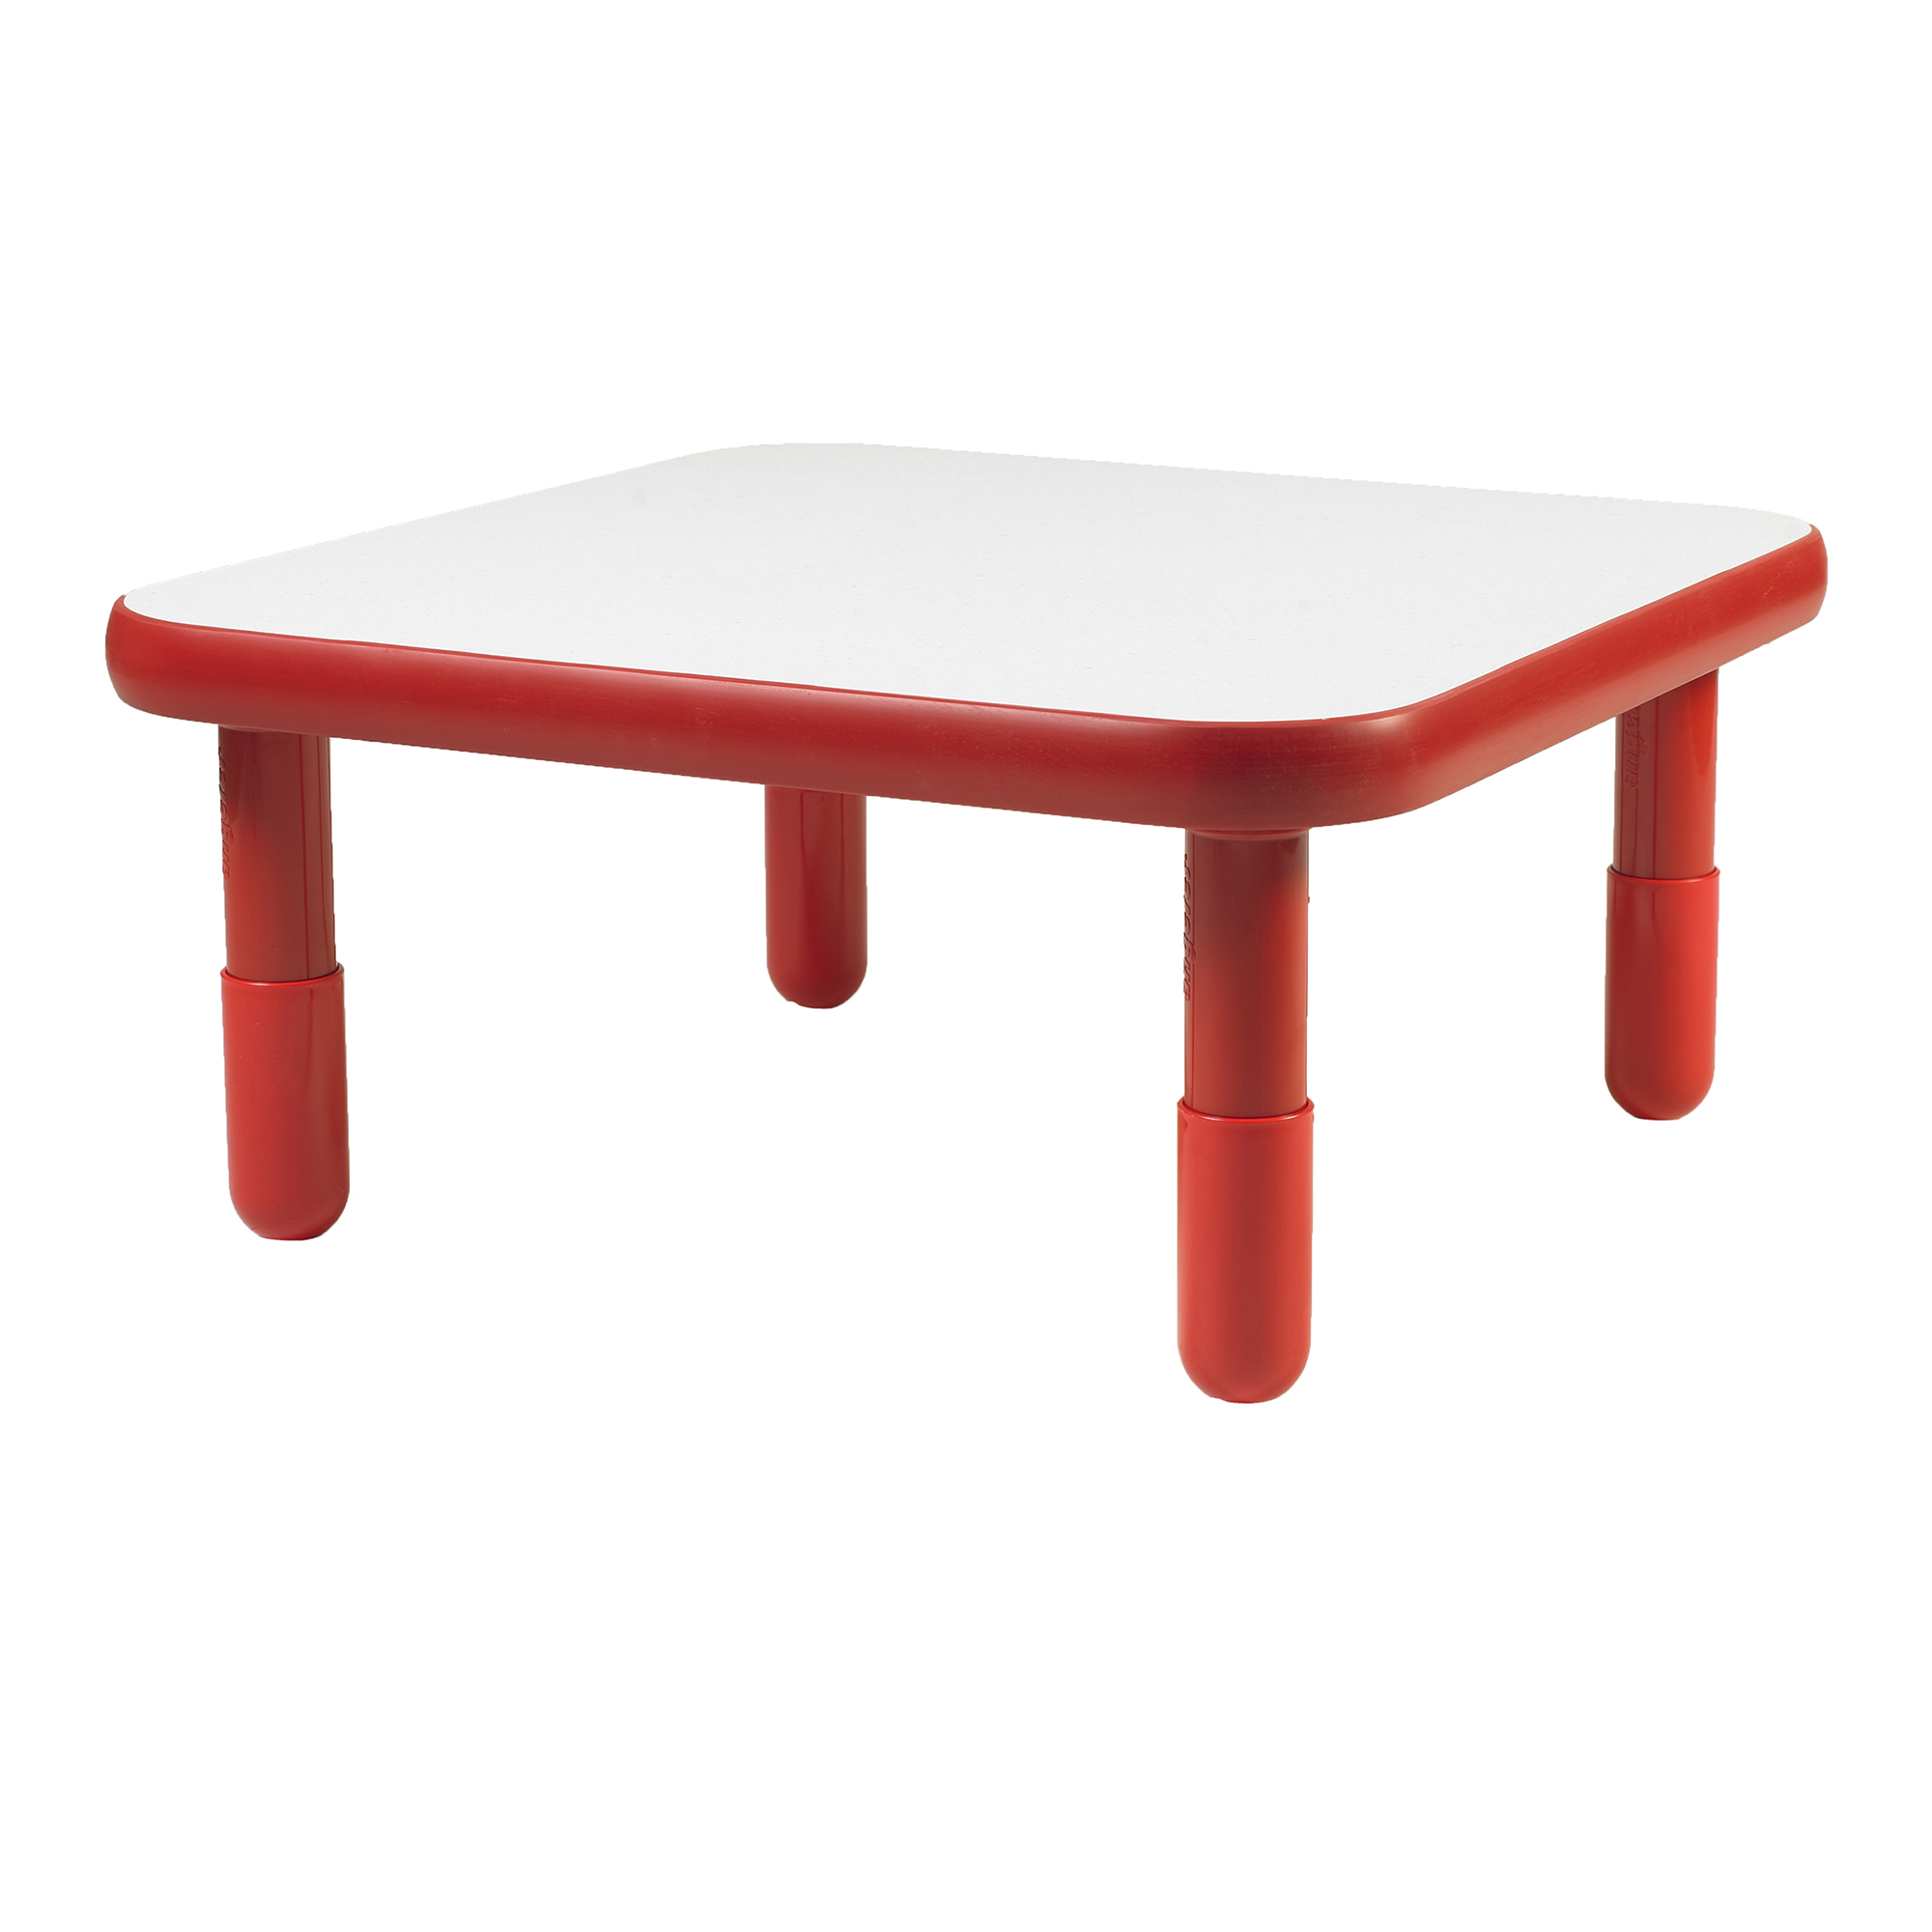 BaseLine® 76 cm  Square Table - Candy Apple Red with 35,5 cm  Legs